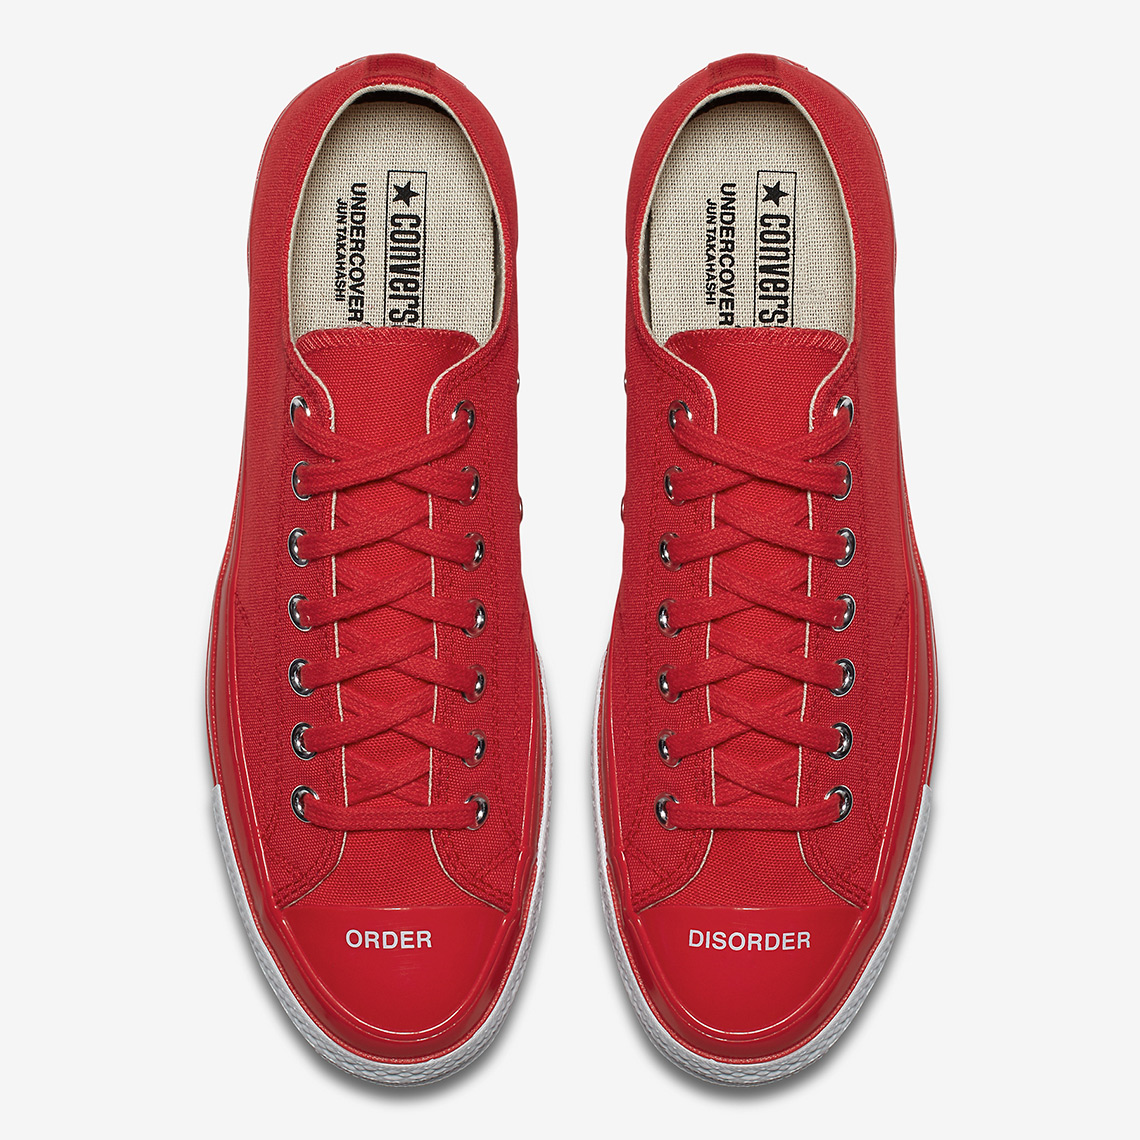 Undercover Converse Chuck 70 Low Red White 2